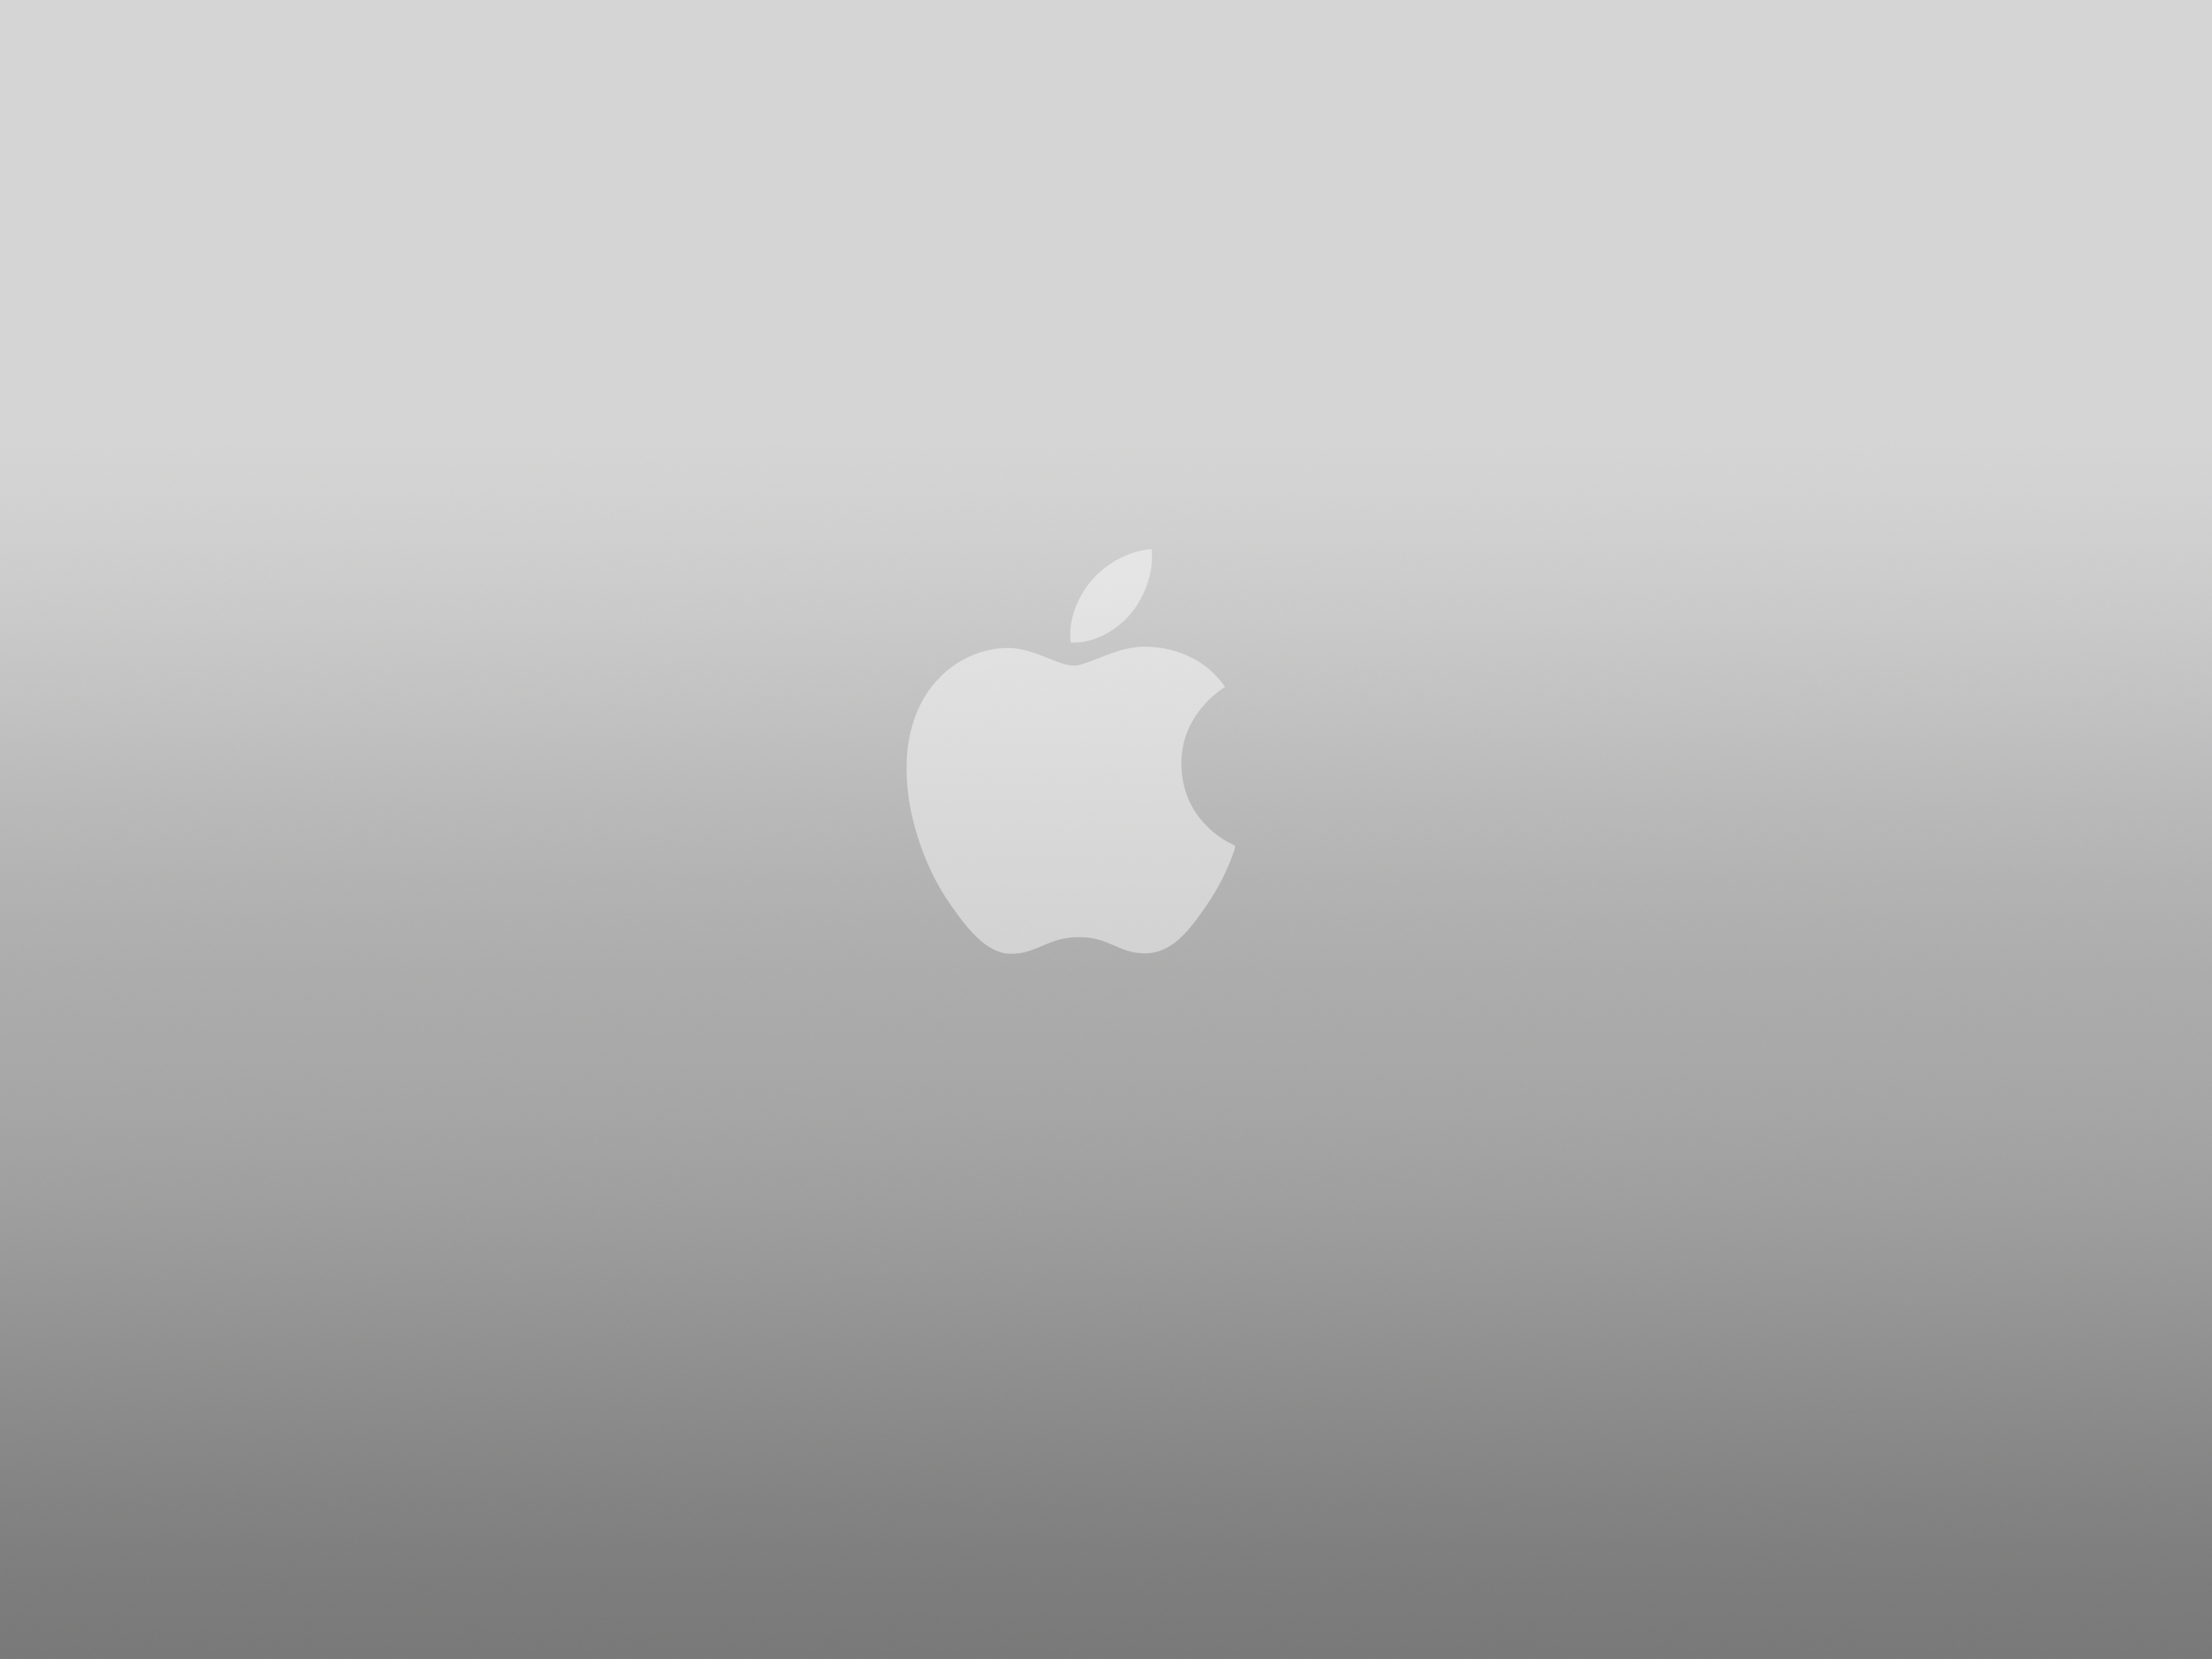 20 Excellent Apple Logo Wallpapers | OSXDaily